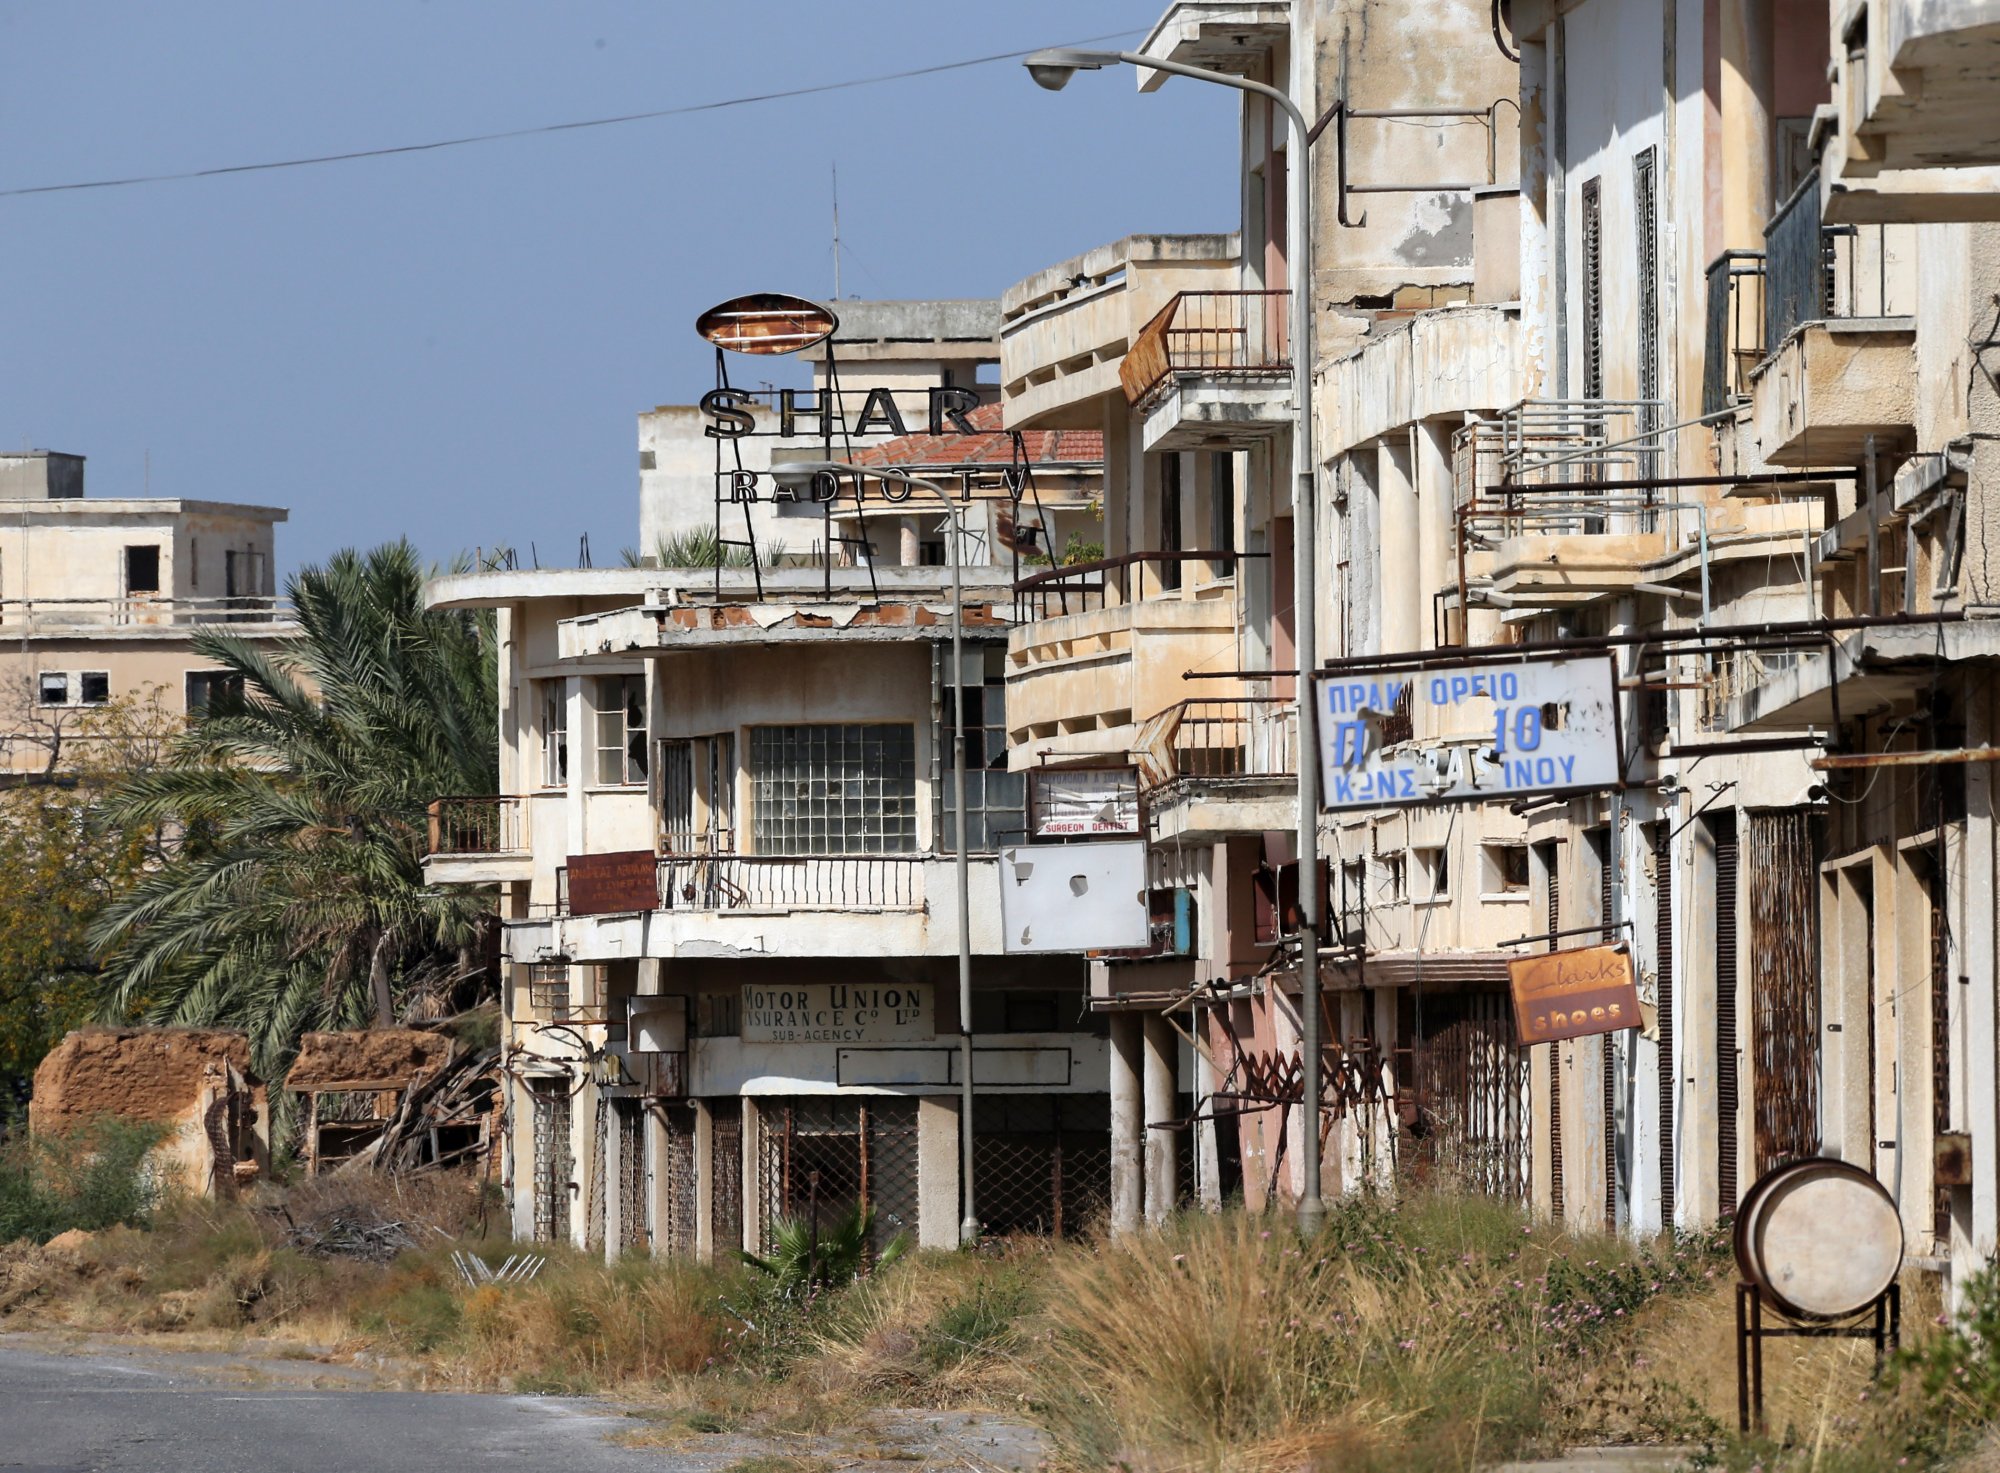 Three Greek Cypriot Women Recall Famagusta, A Cosmopolitan City that Turned into a “Ghost town”